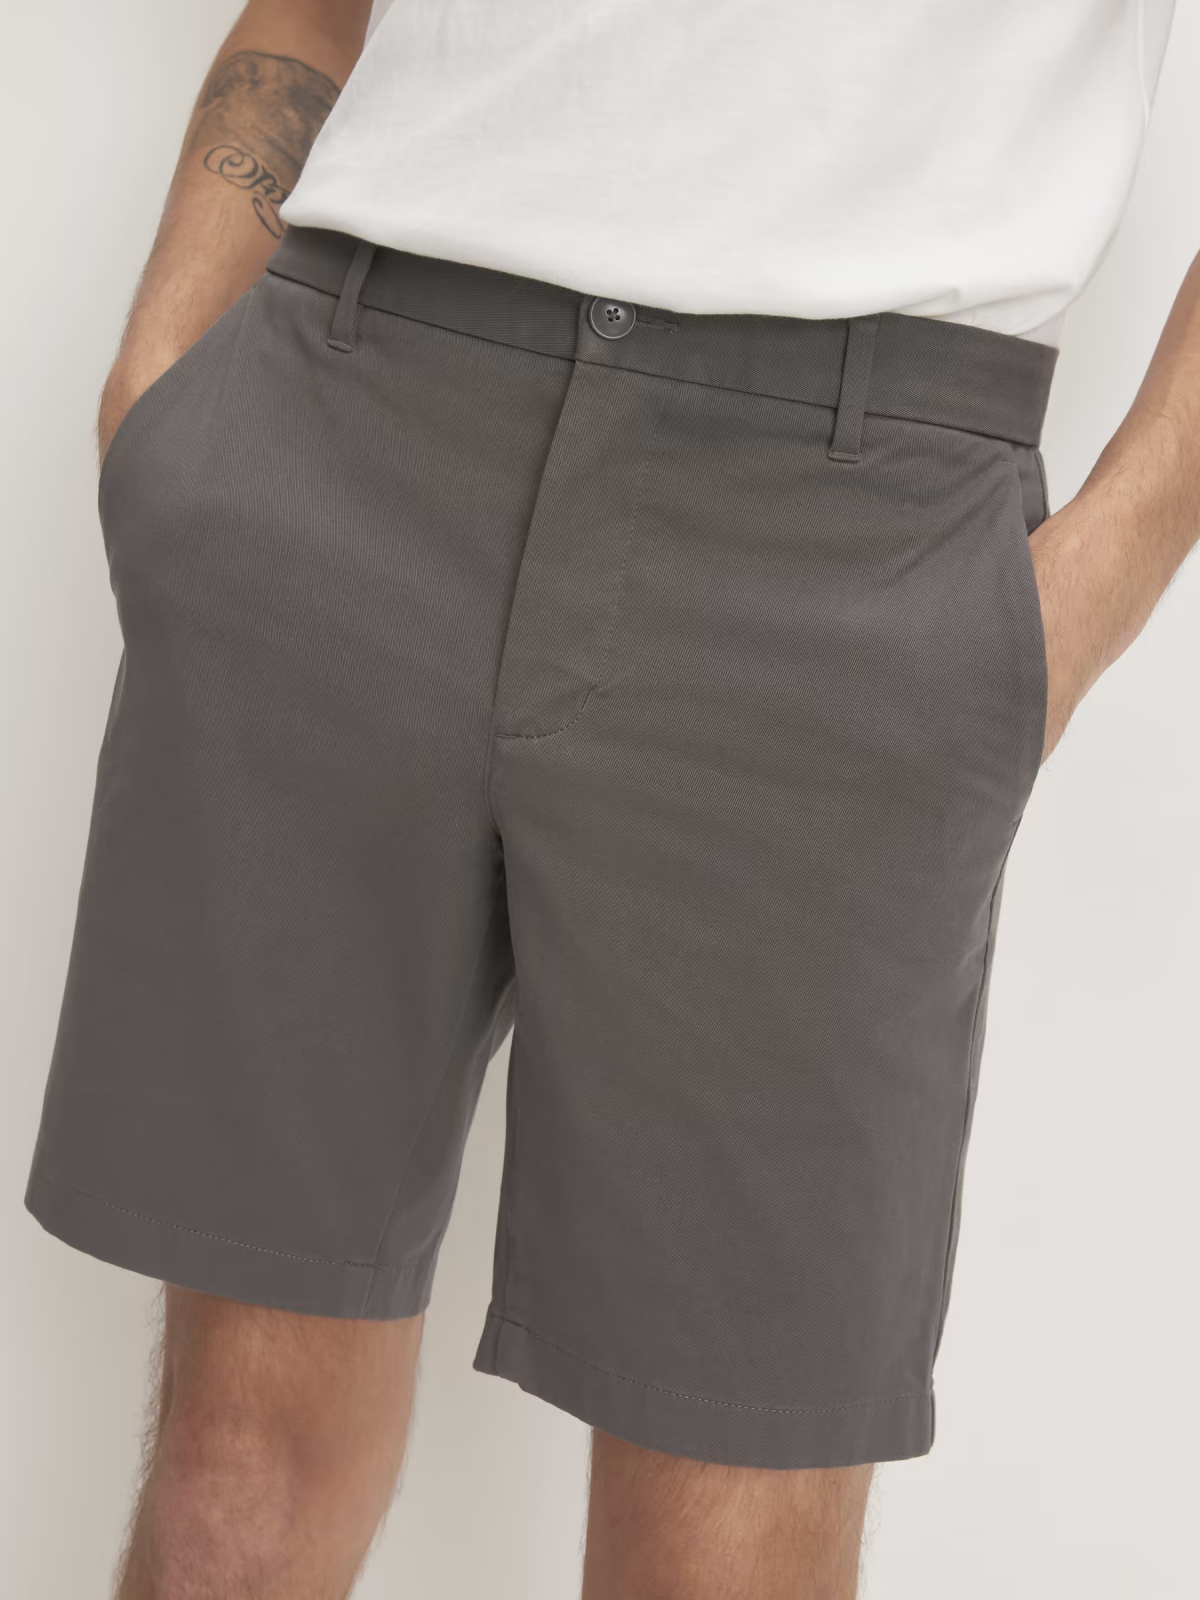 The Fit Performance Short